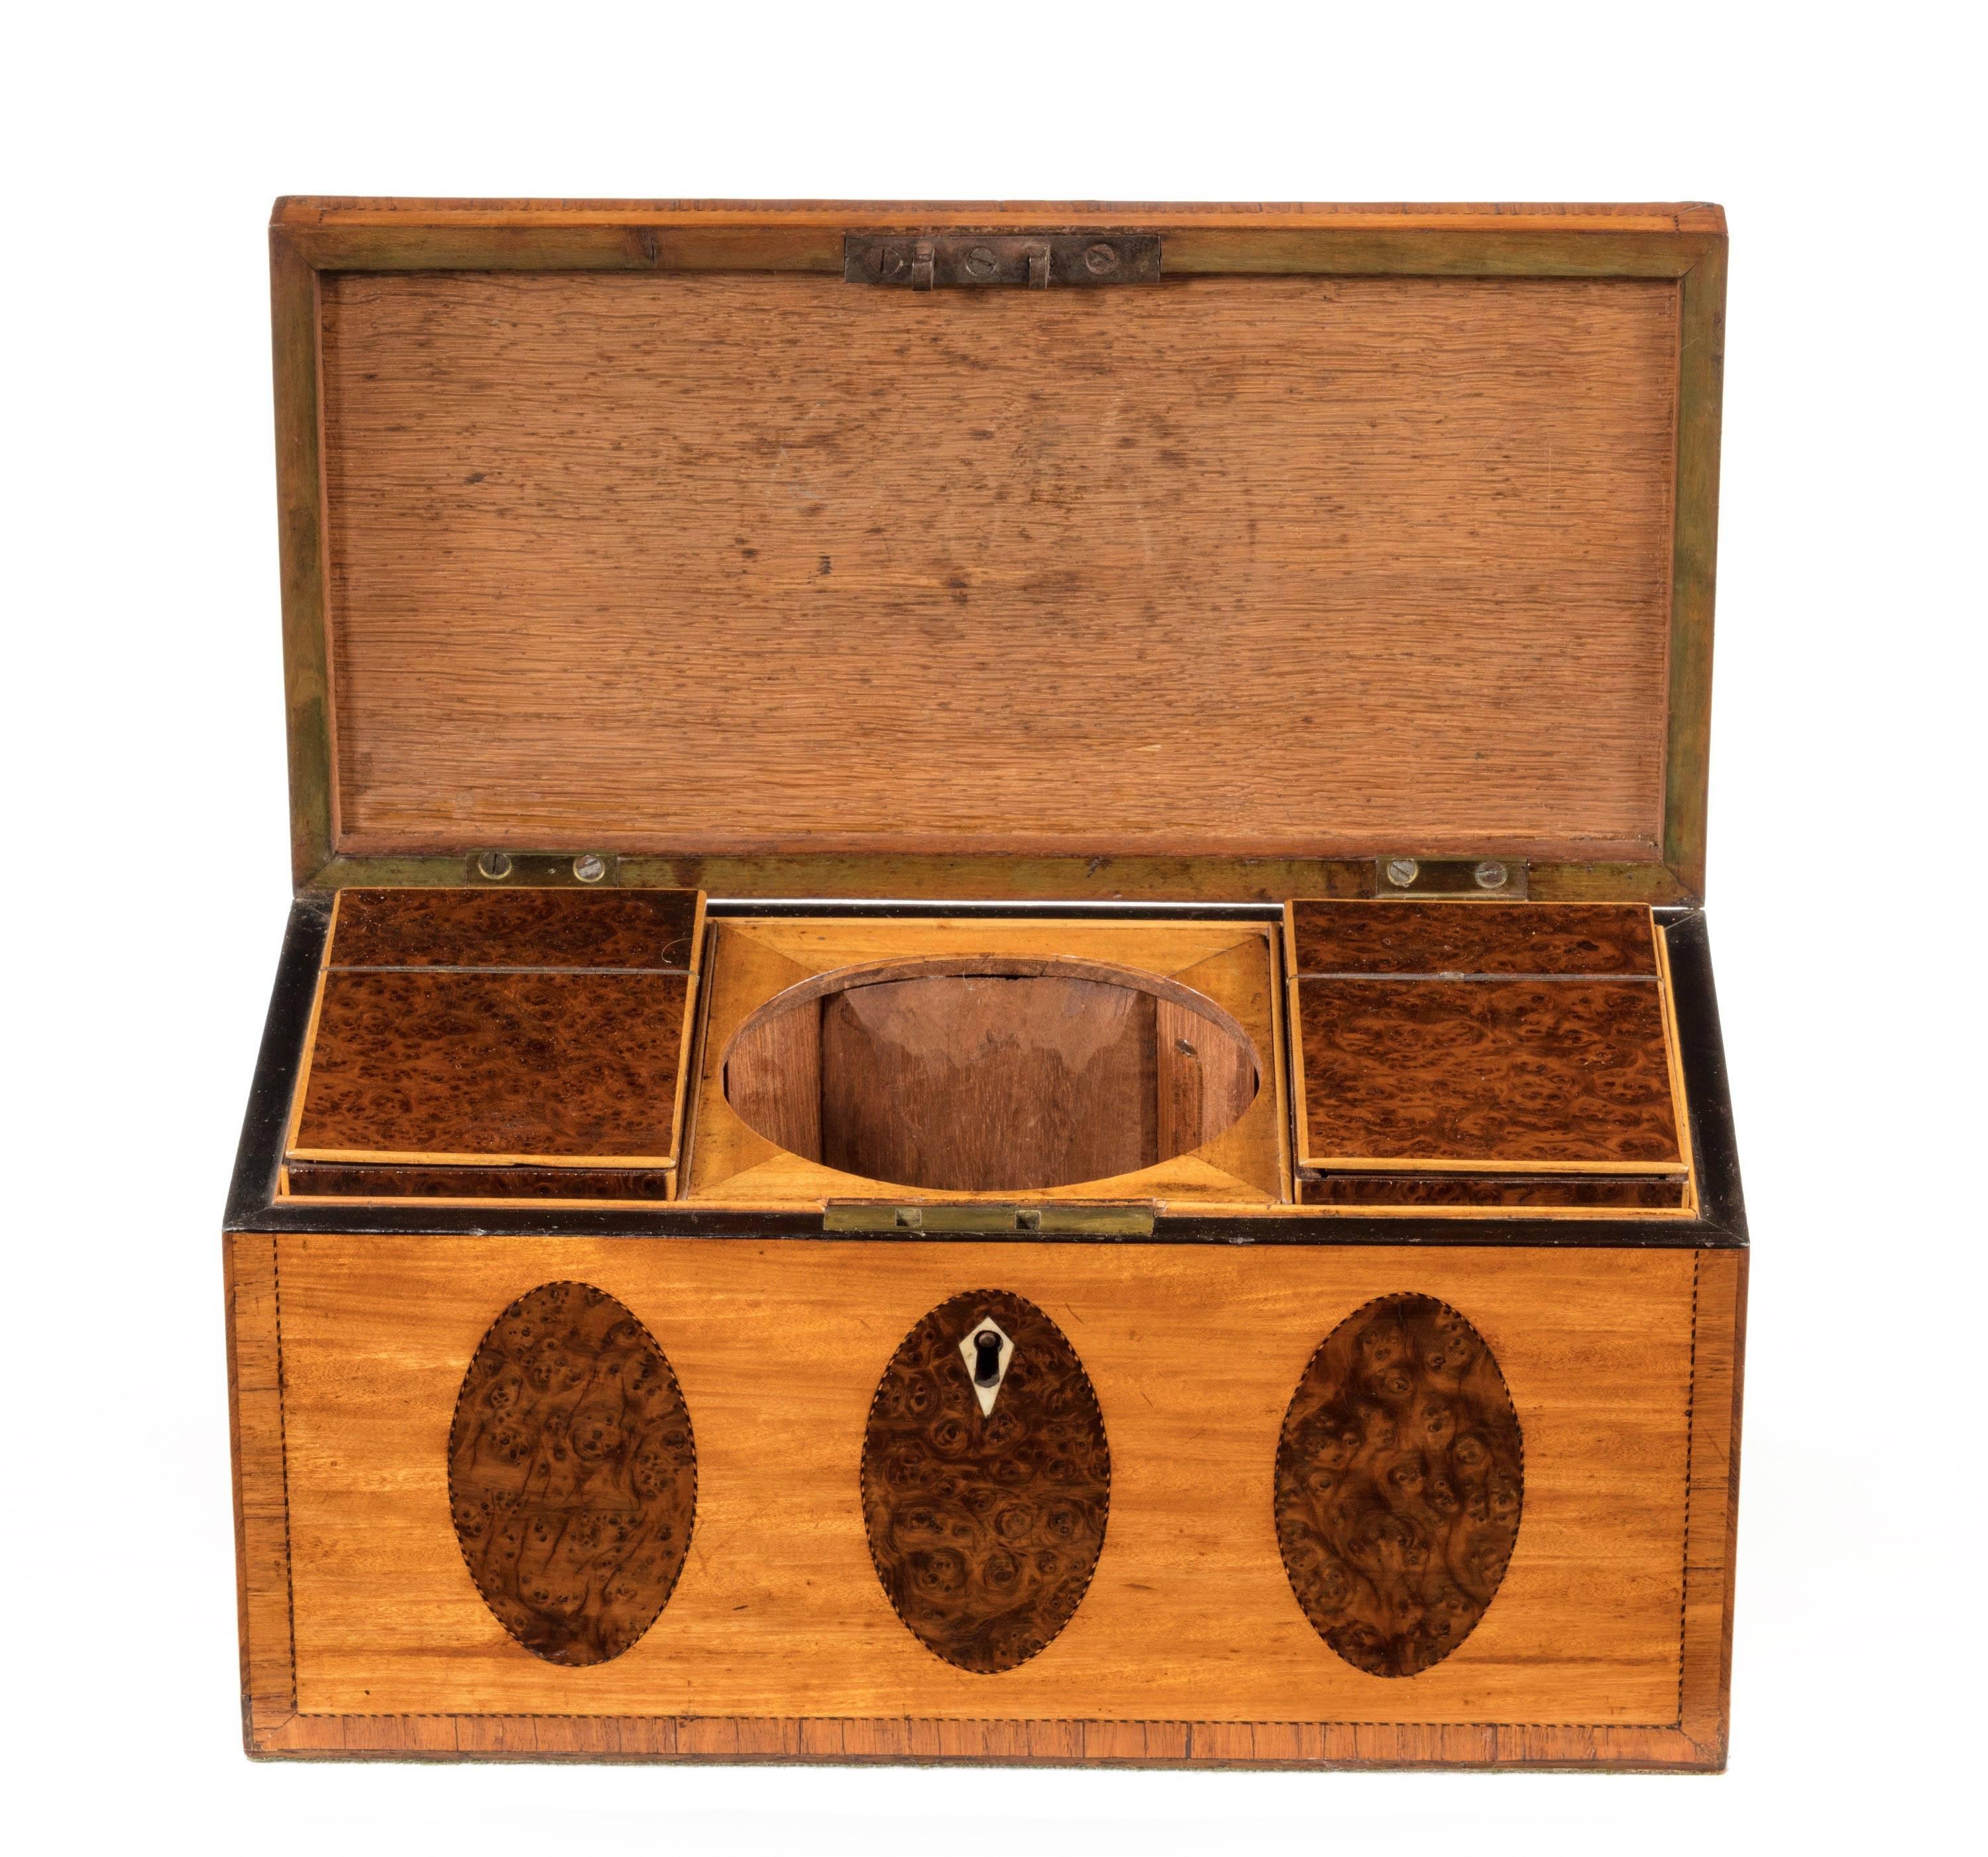 George III period Satinwood and burr yew tea caddy. Of quite exceptional quality. The interior with two original lidded burr yew containers. The central mixing bowl now missing.